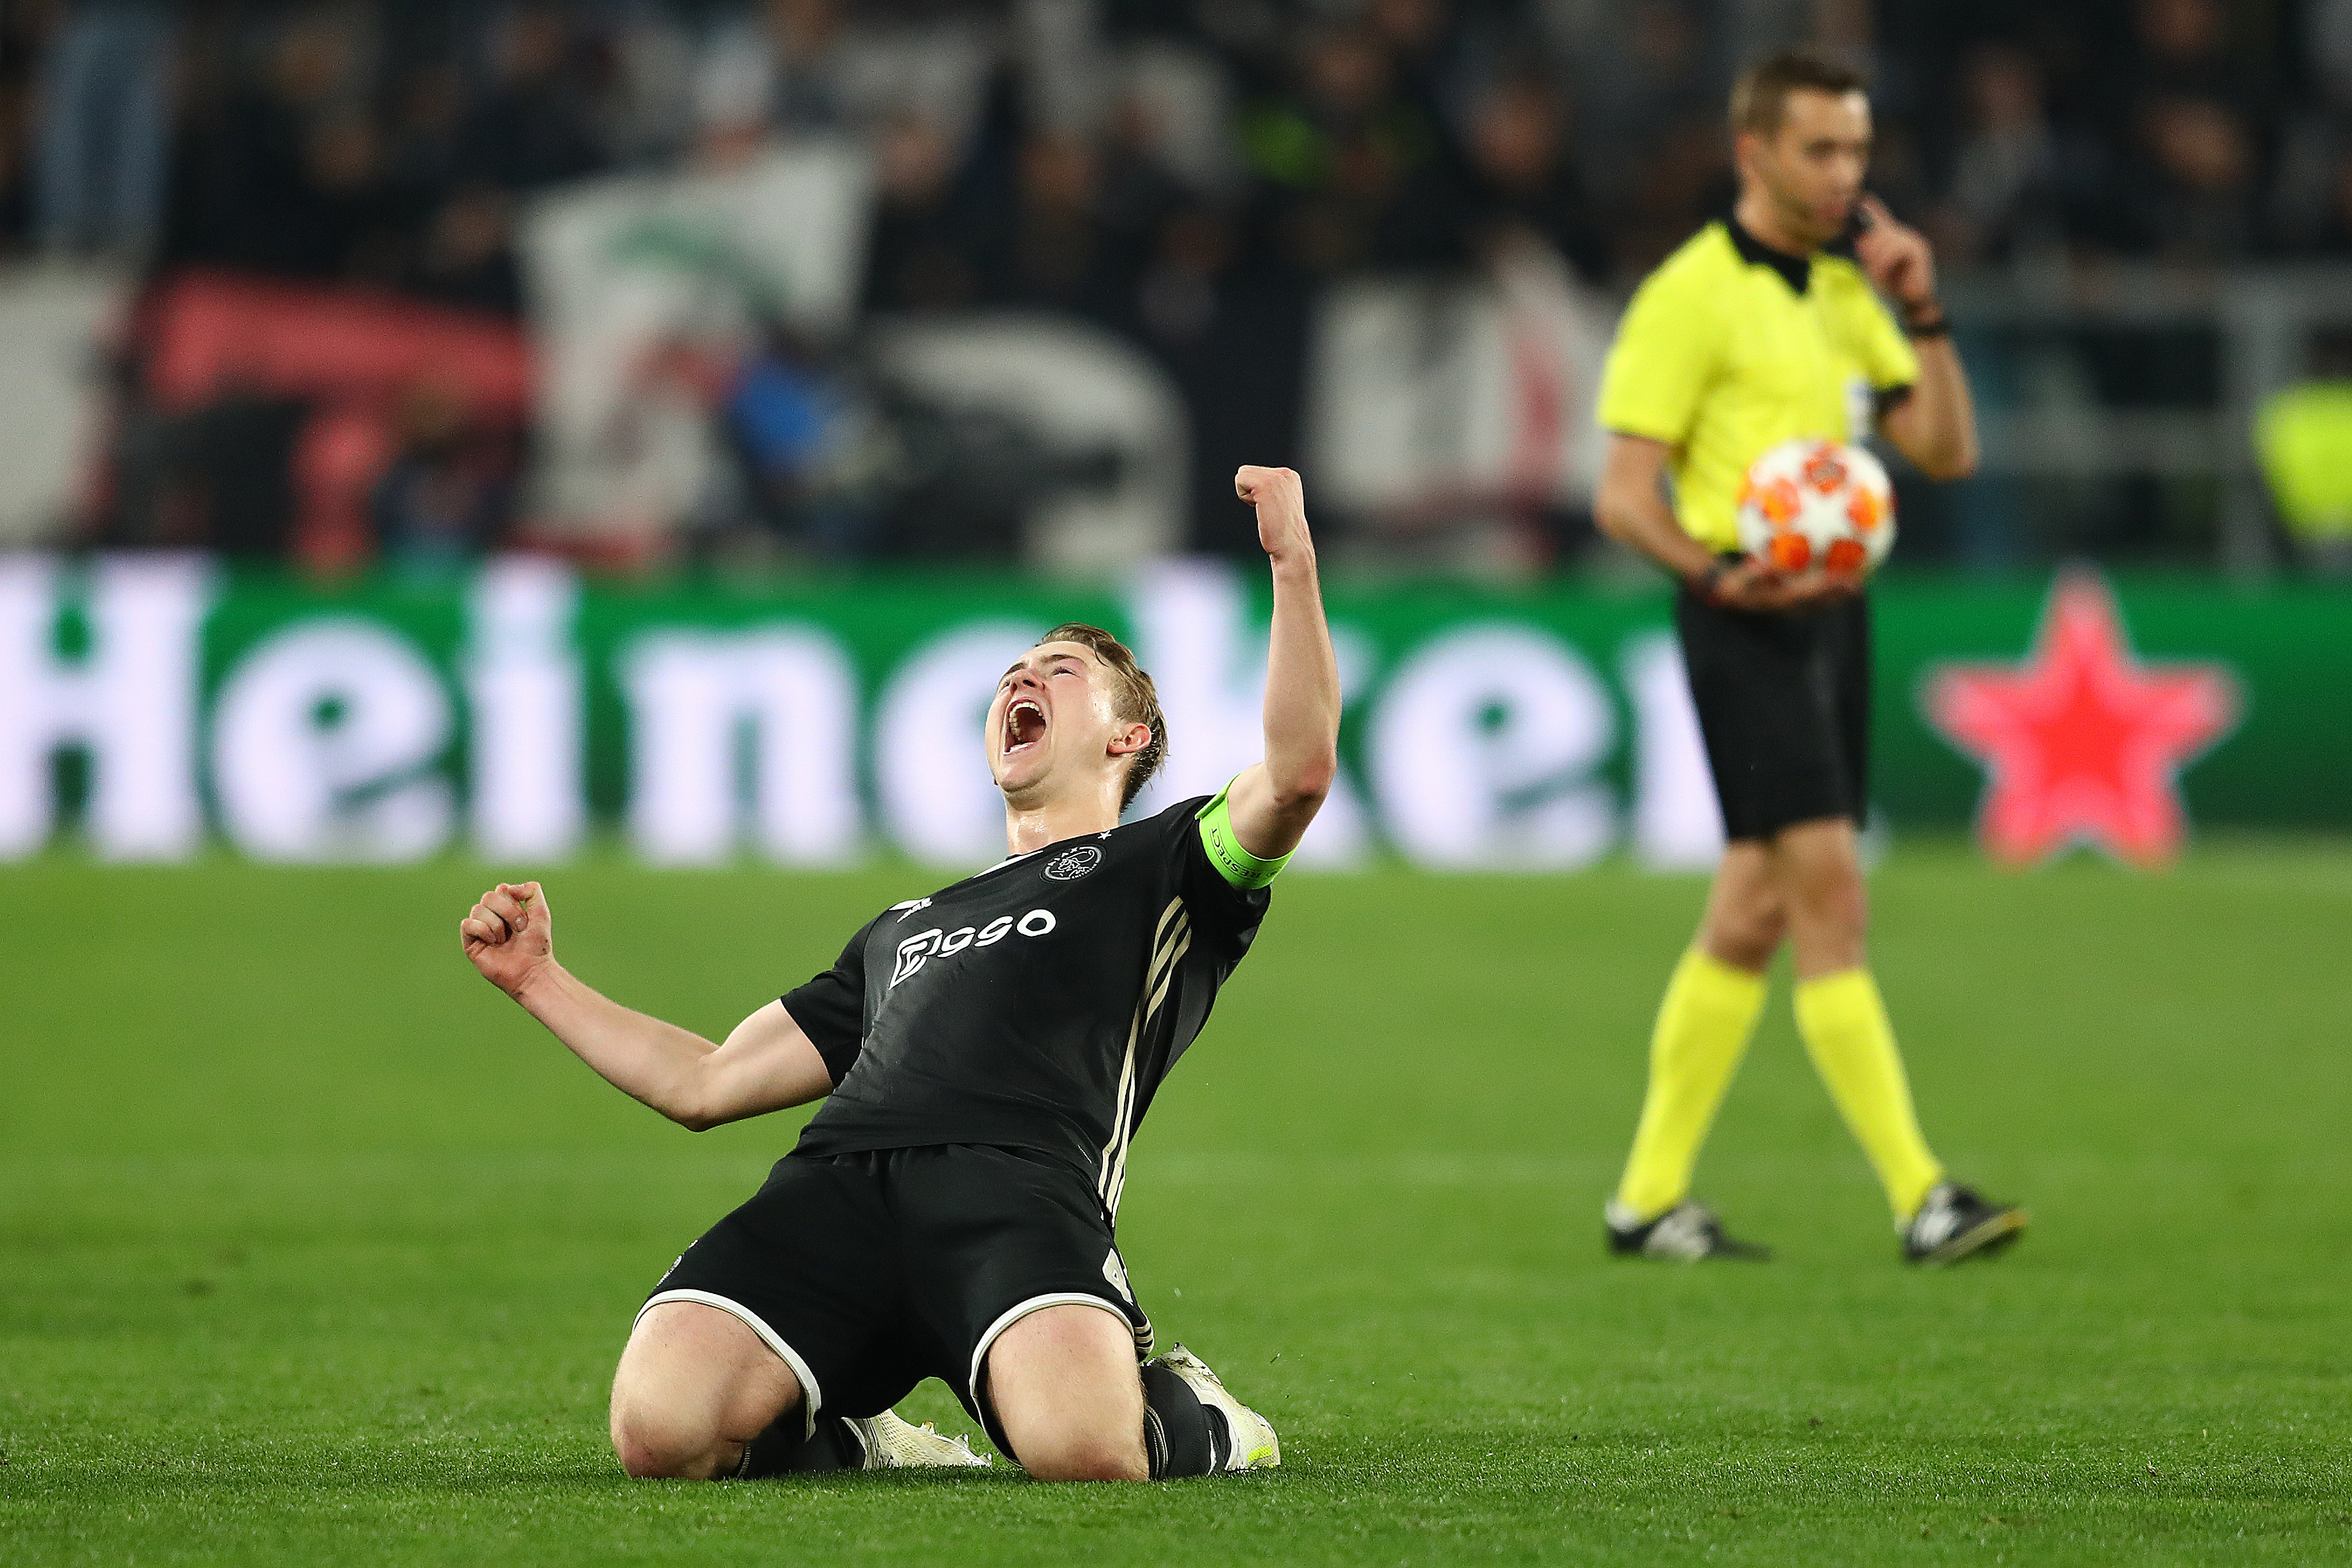 TURIN, ITALY - APRIL 16:  Matthijs de Ligt of Ajax celebrates his sides 2-1 victory as referee Clement Turpin of France blows the final whistle during the UEFA Champions League Quarter Final second leg match between Juventus and Ajax at Juventus Stadium on April 16, 2019 in Turin, Italy. (Photo by Michael Steele/Getty Images)